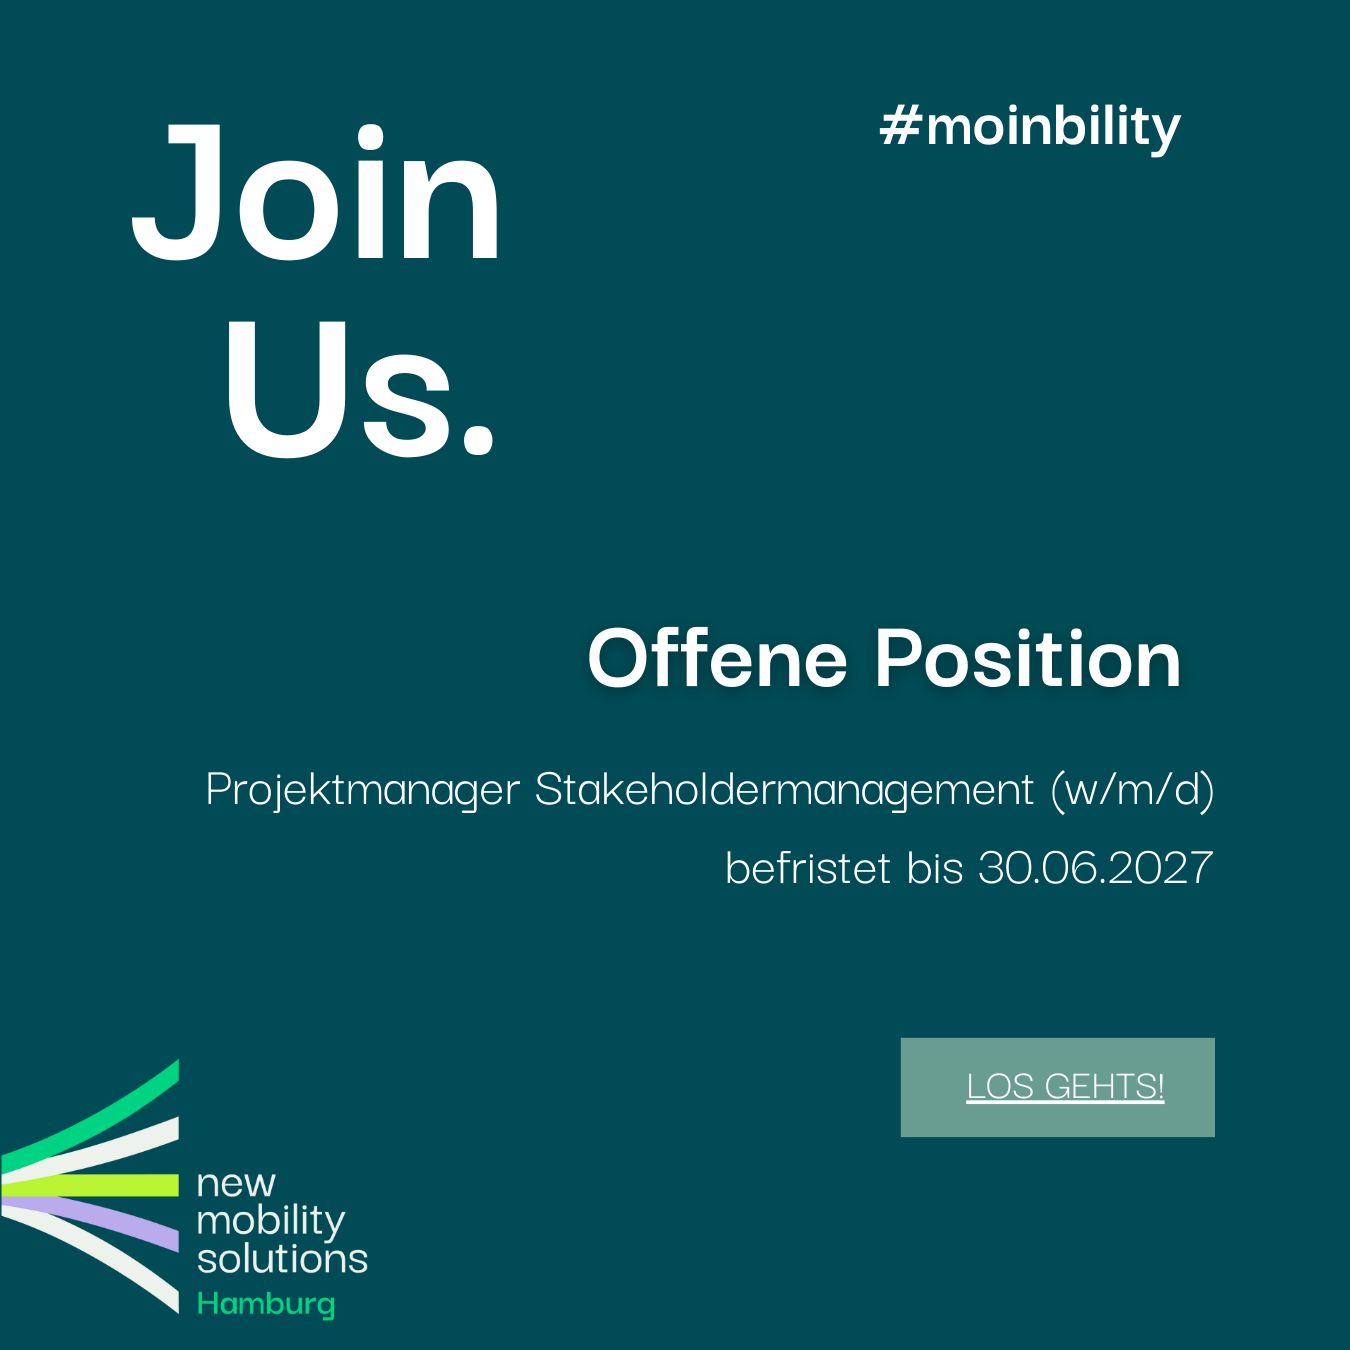 Join us. Offene Position